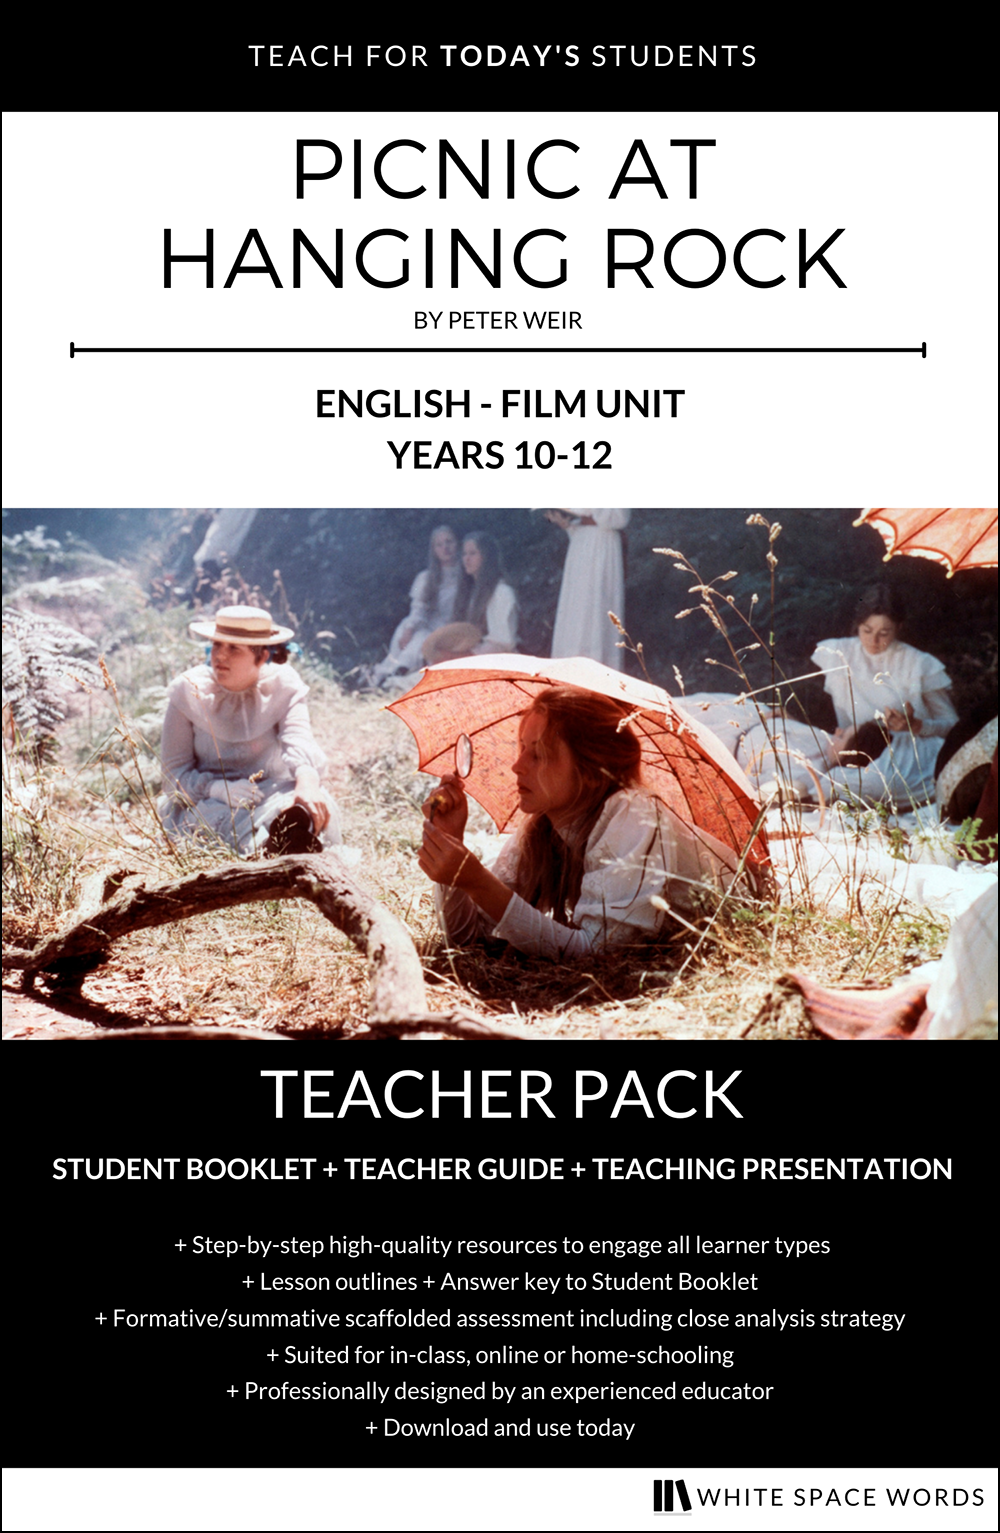 Shop　Picnic　The　Rock　Education　at　Pack)　Hanging　(Teacher